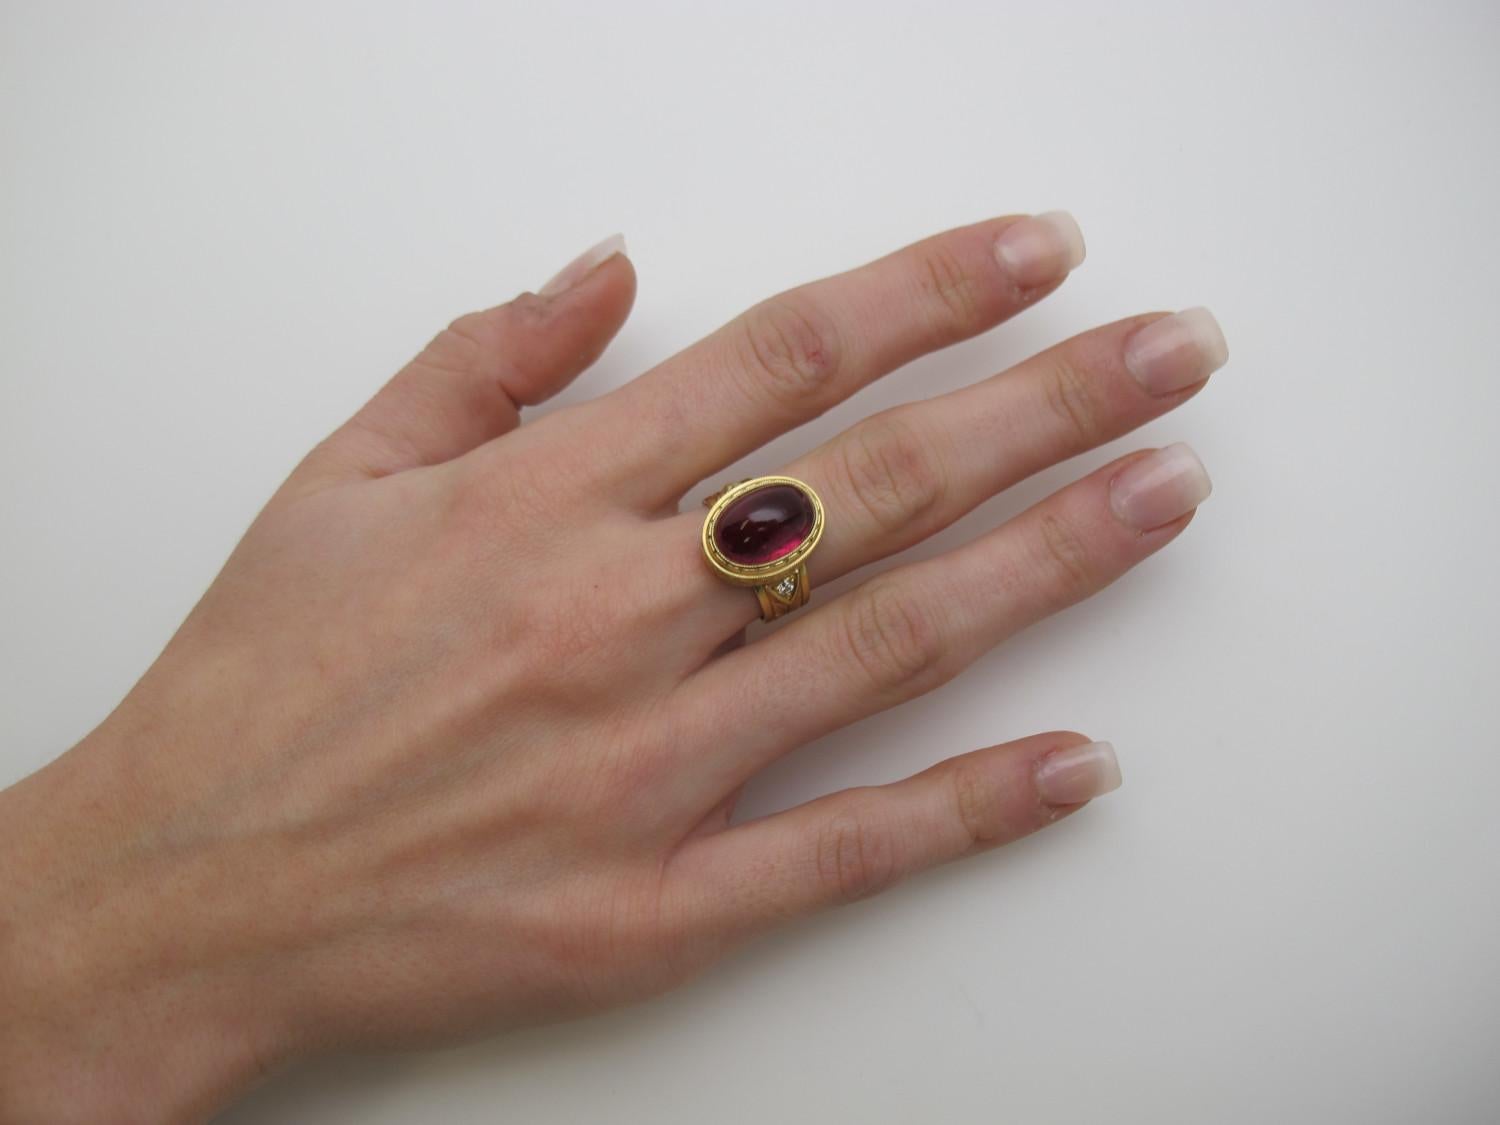 7.47 Carat Rubellite Tourmaline Cabochon and Diamond Band Ring in Yellow Gold For Sale 5